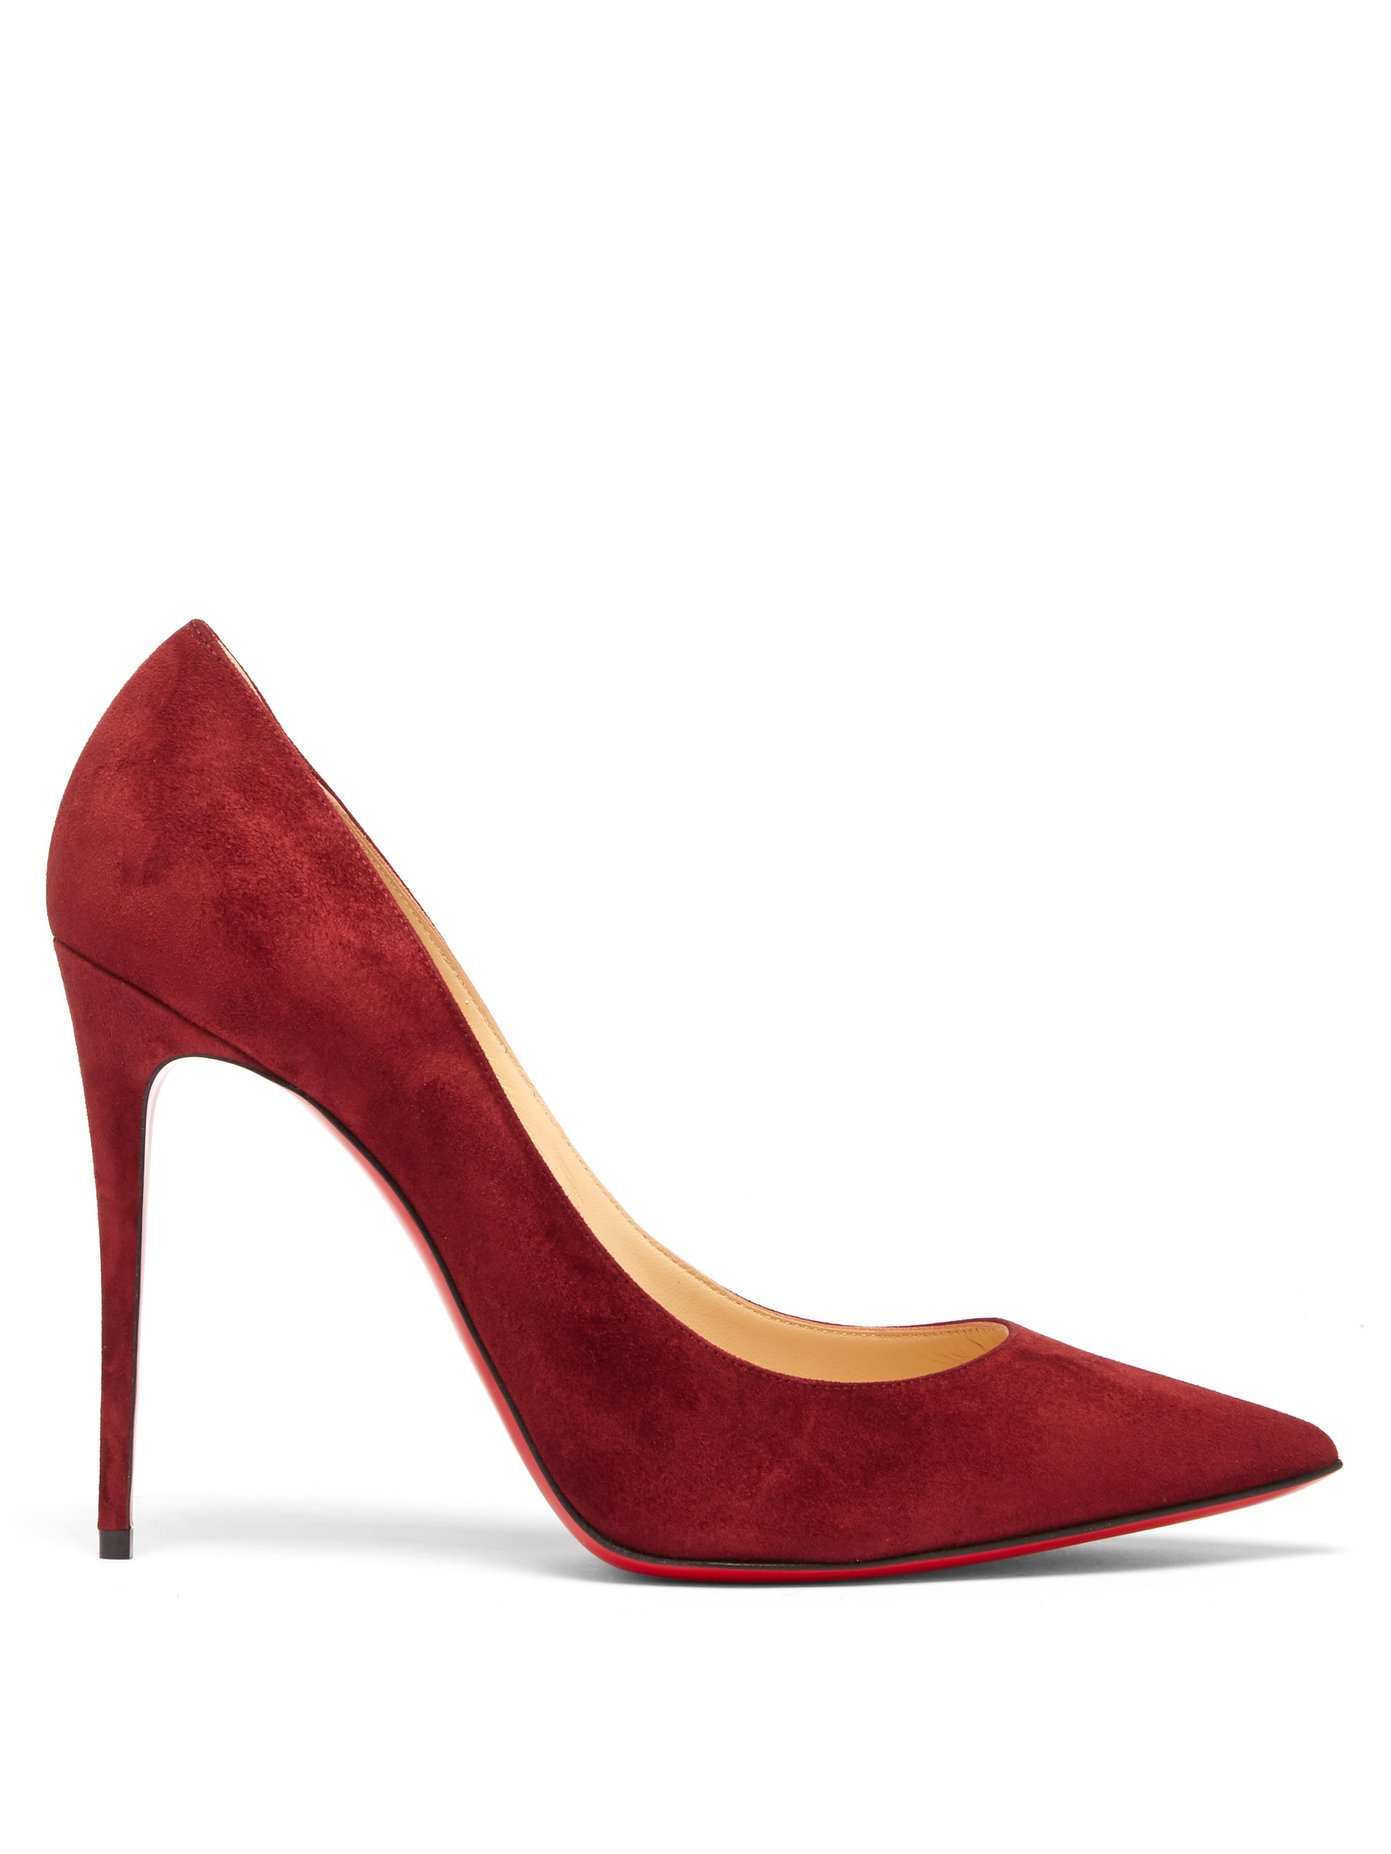 Kate 100 suede pumps | Christian 